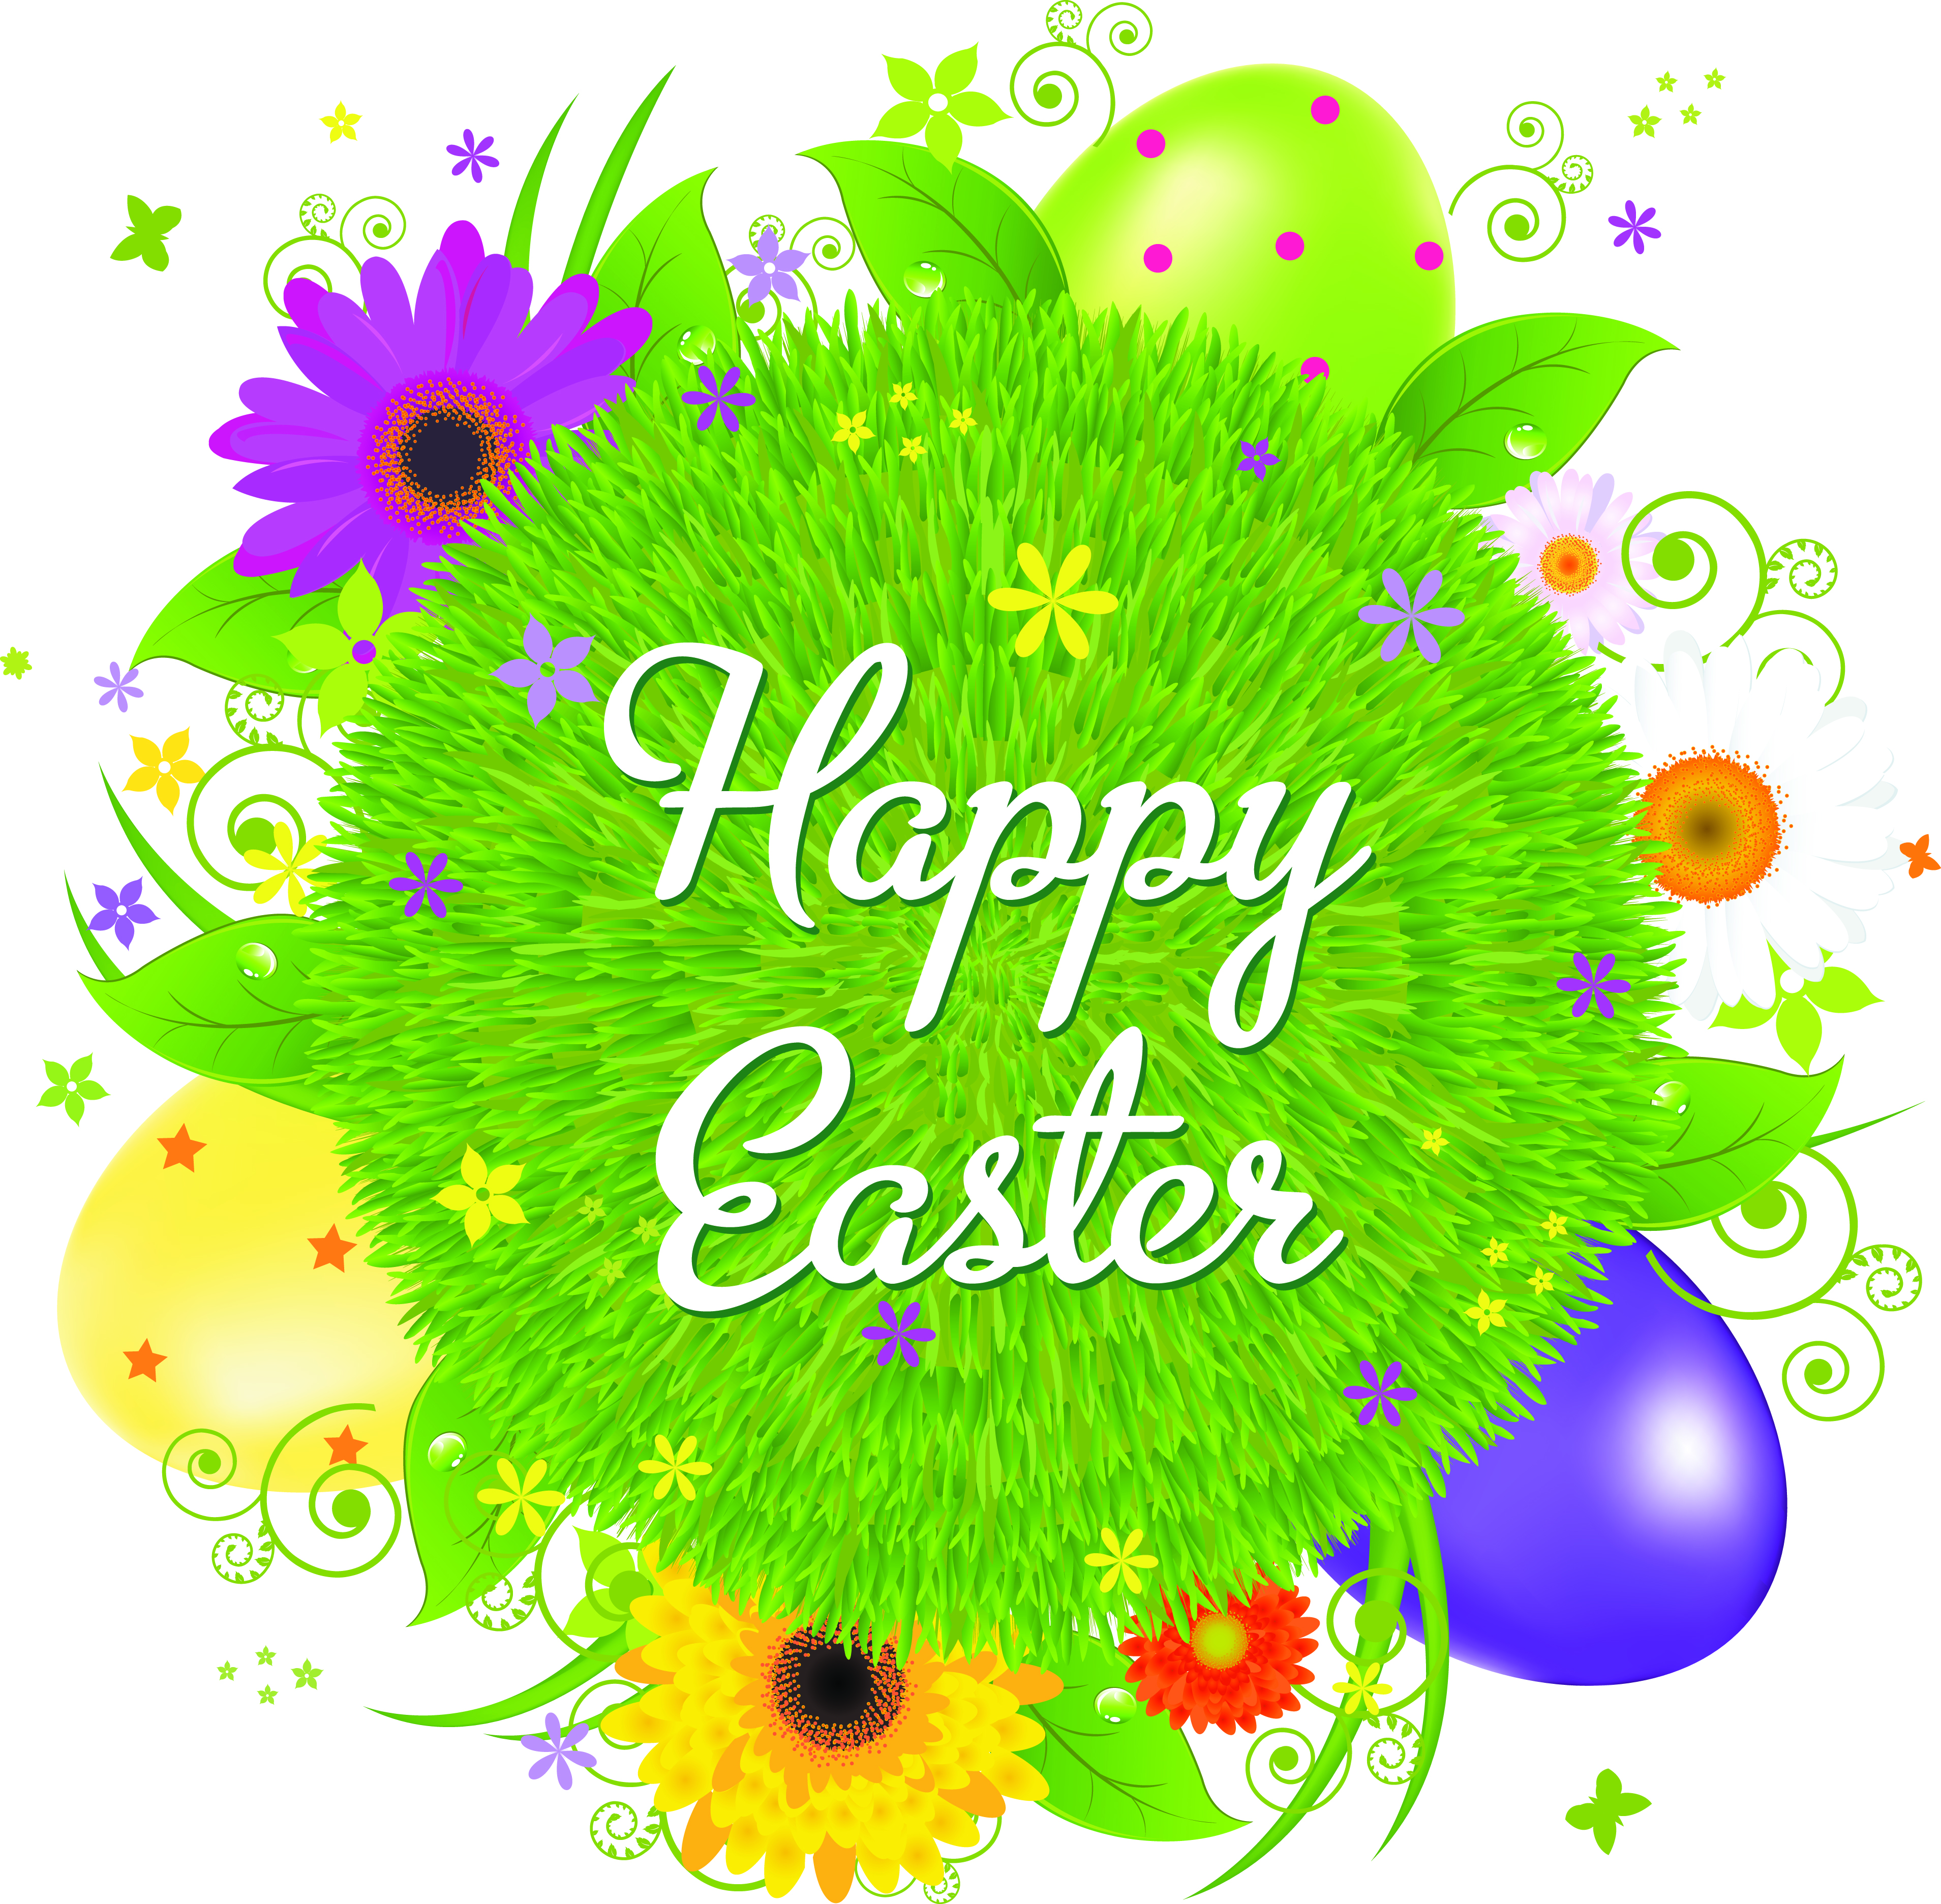 13 Happy Easter Vector Images.